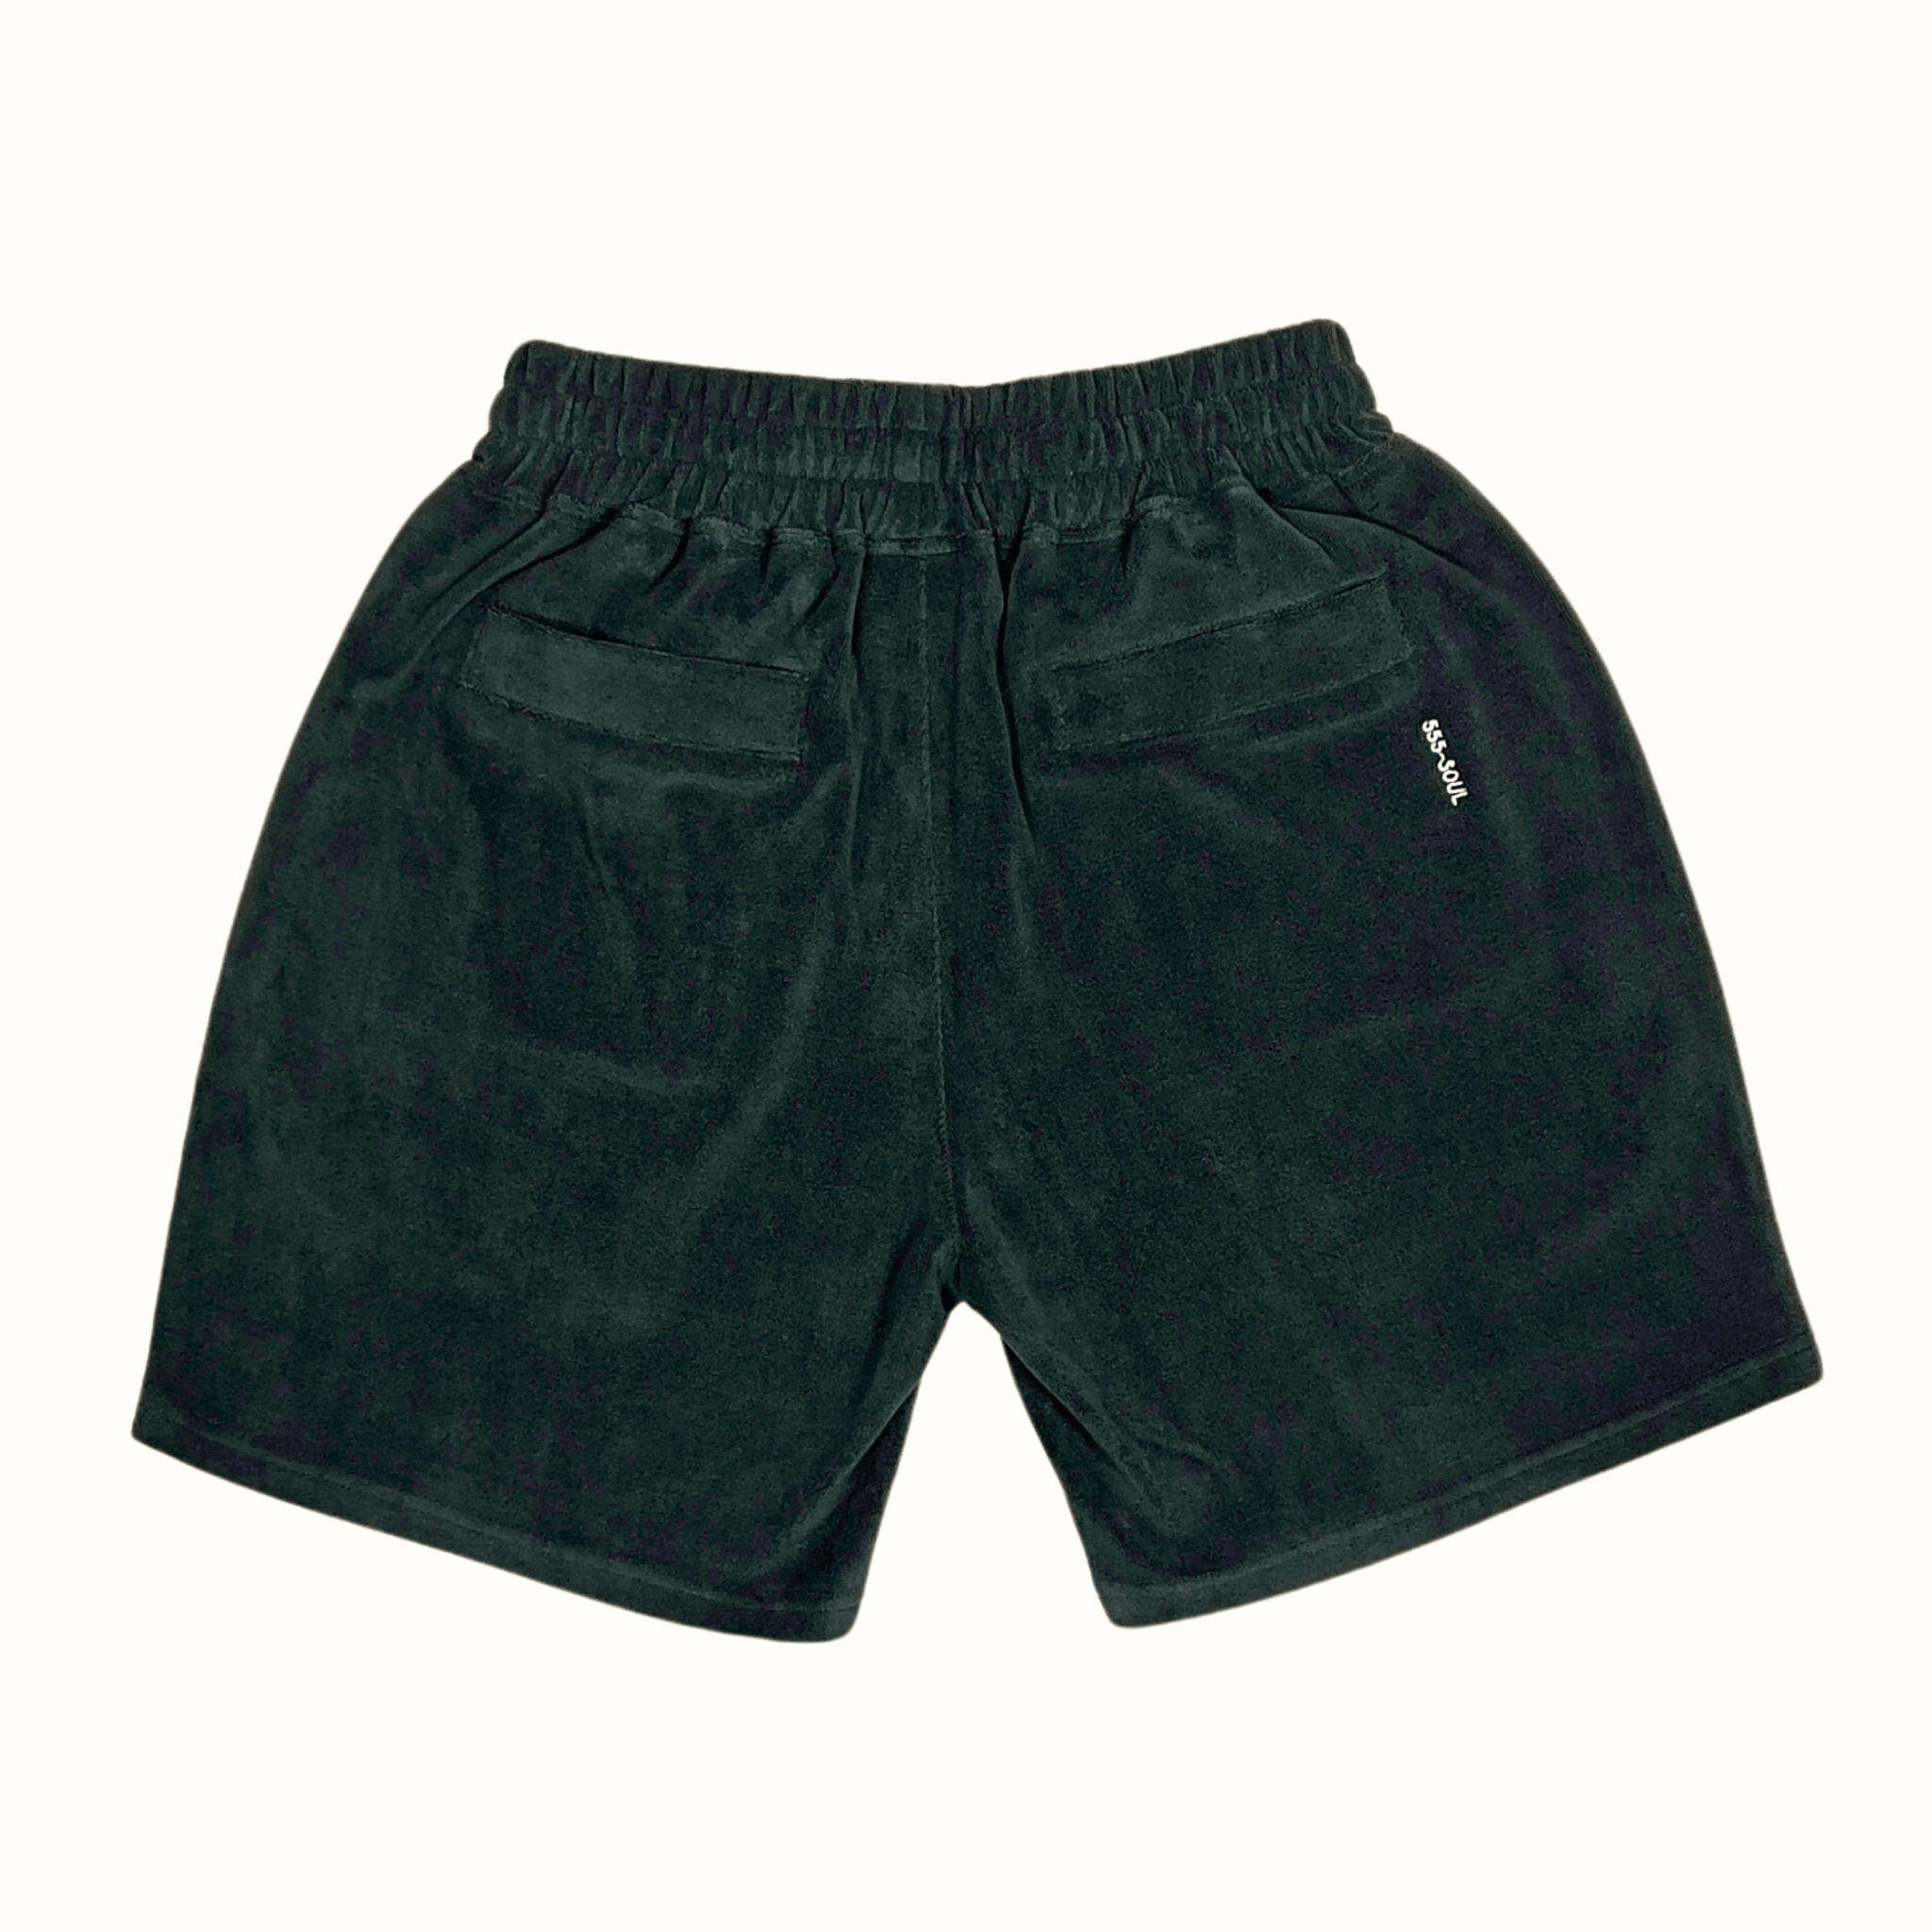 Classon Shorts in washed black - Triple Five Soul - State Of Flux